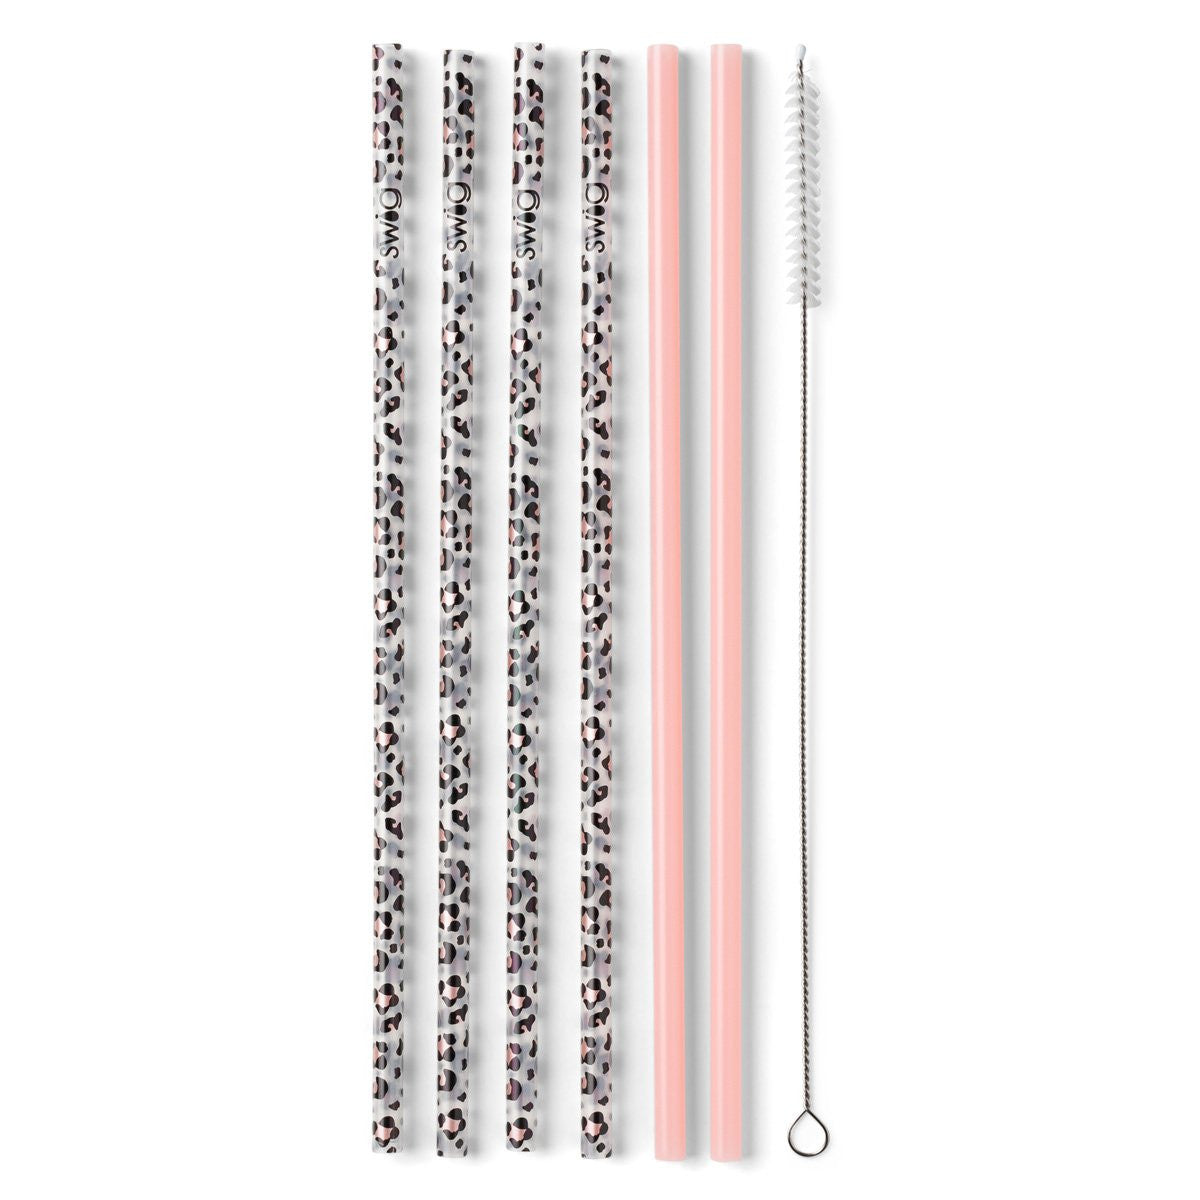 Swig Oh Happy Day Reusable Straw Set